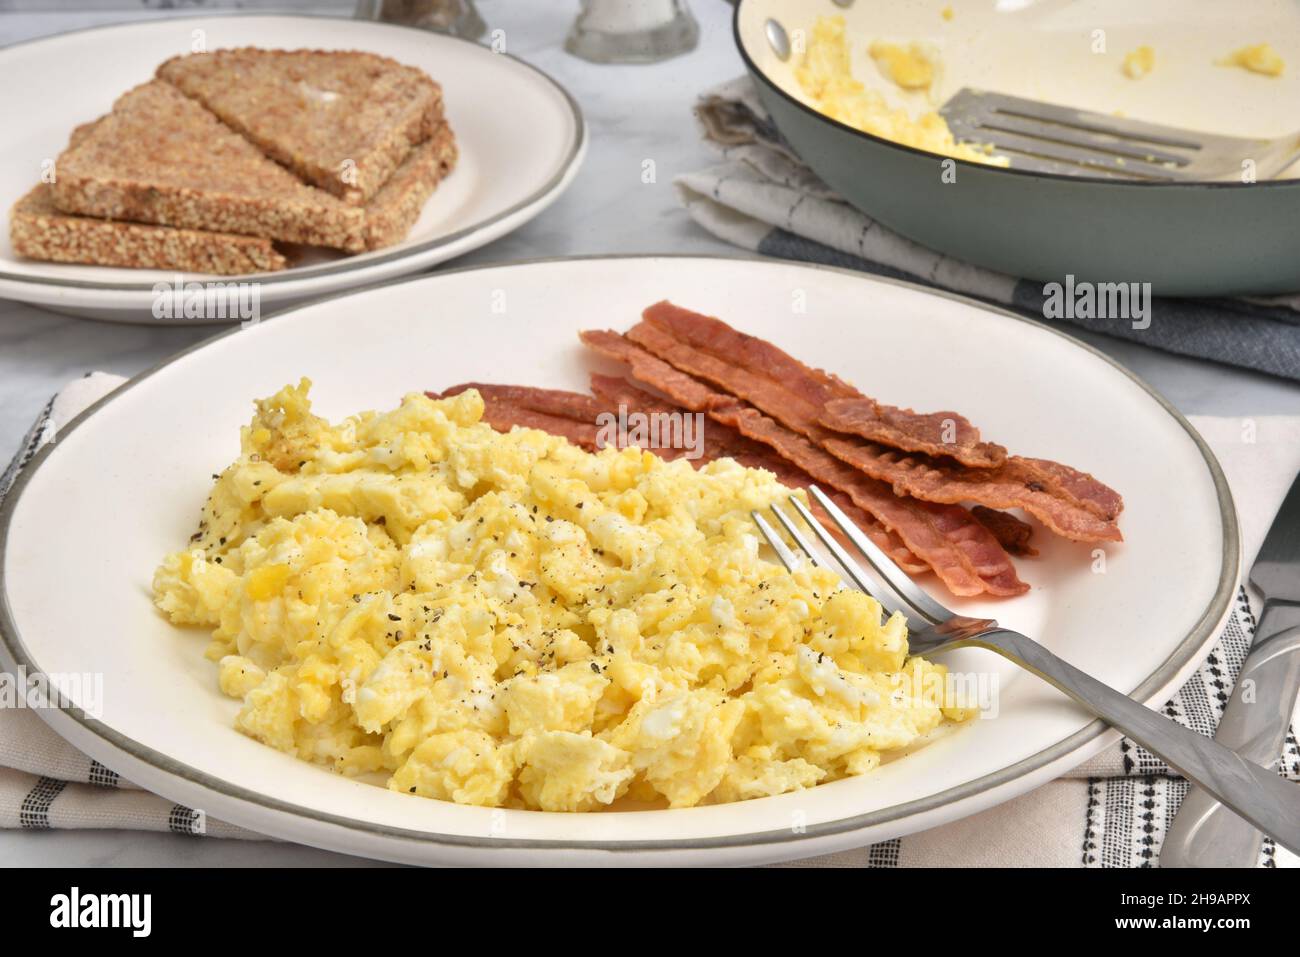 Scrambled egg, bacon and toast breakfast close up Stock Photo